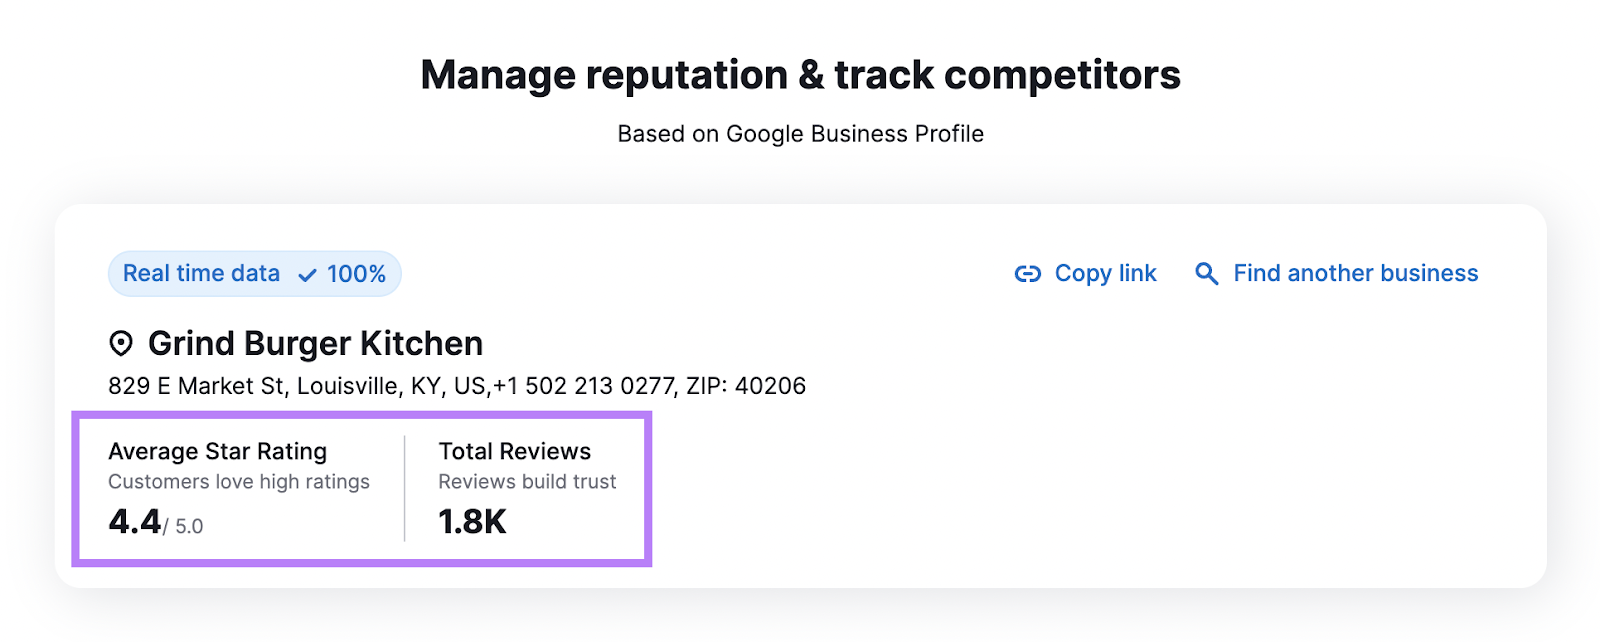 “Manage reputation & track competitors” section in Review Management